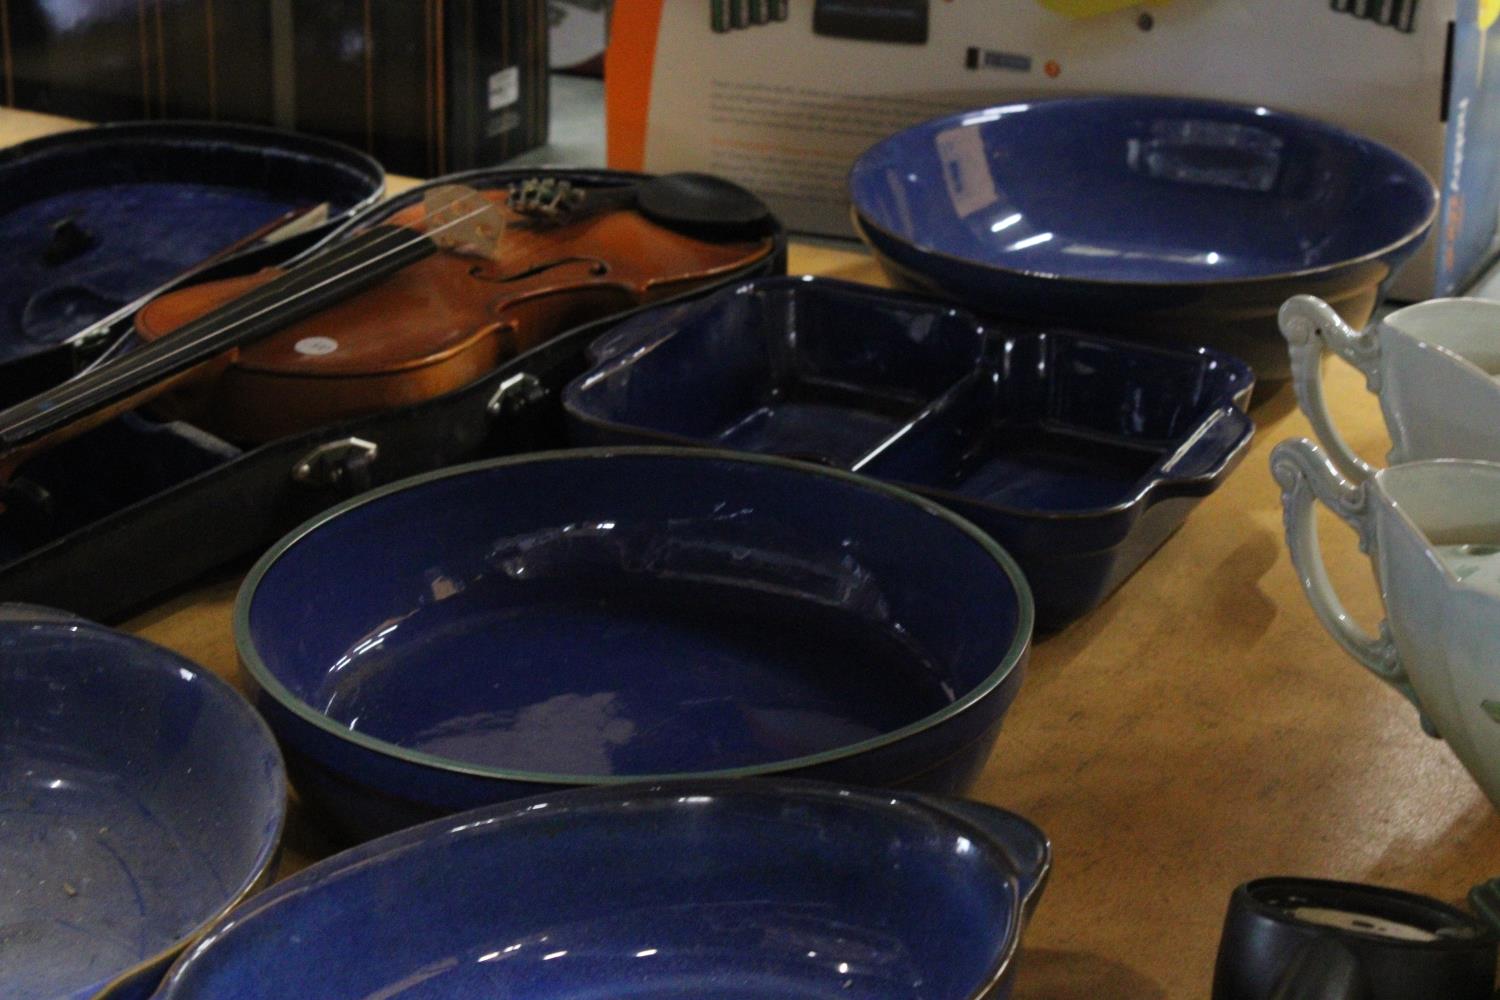 FIVE LARGE PIECES OF DENBY, BLUE, OVEN DISHES - Image 2 of 4